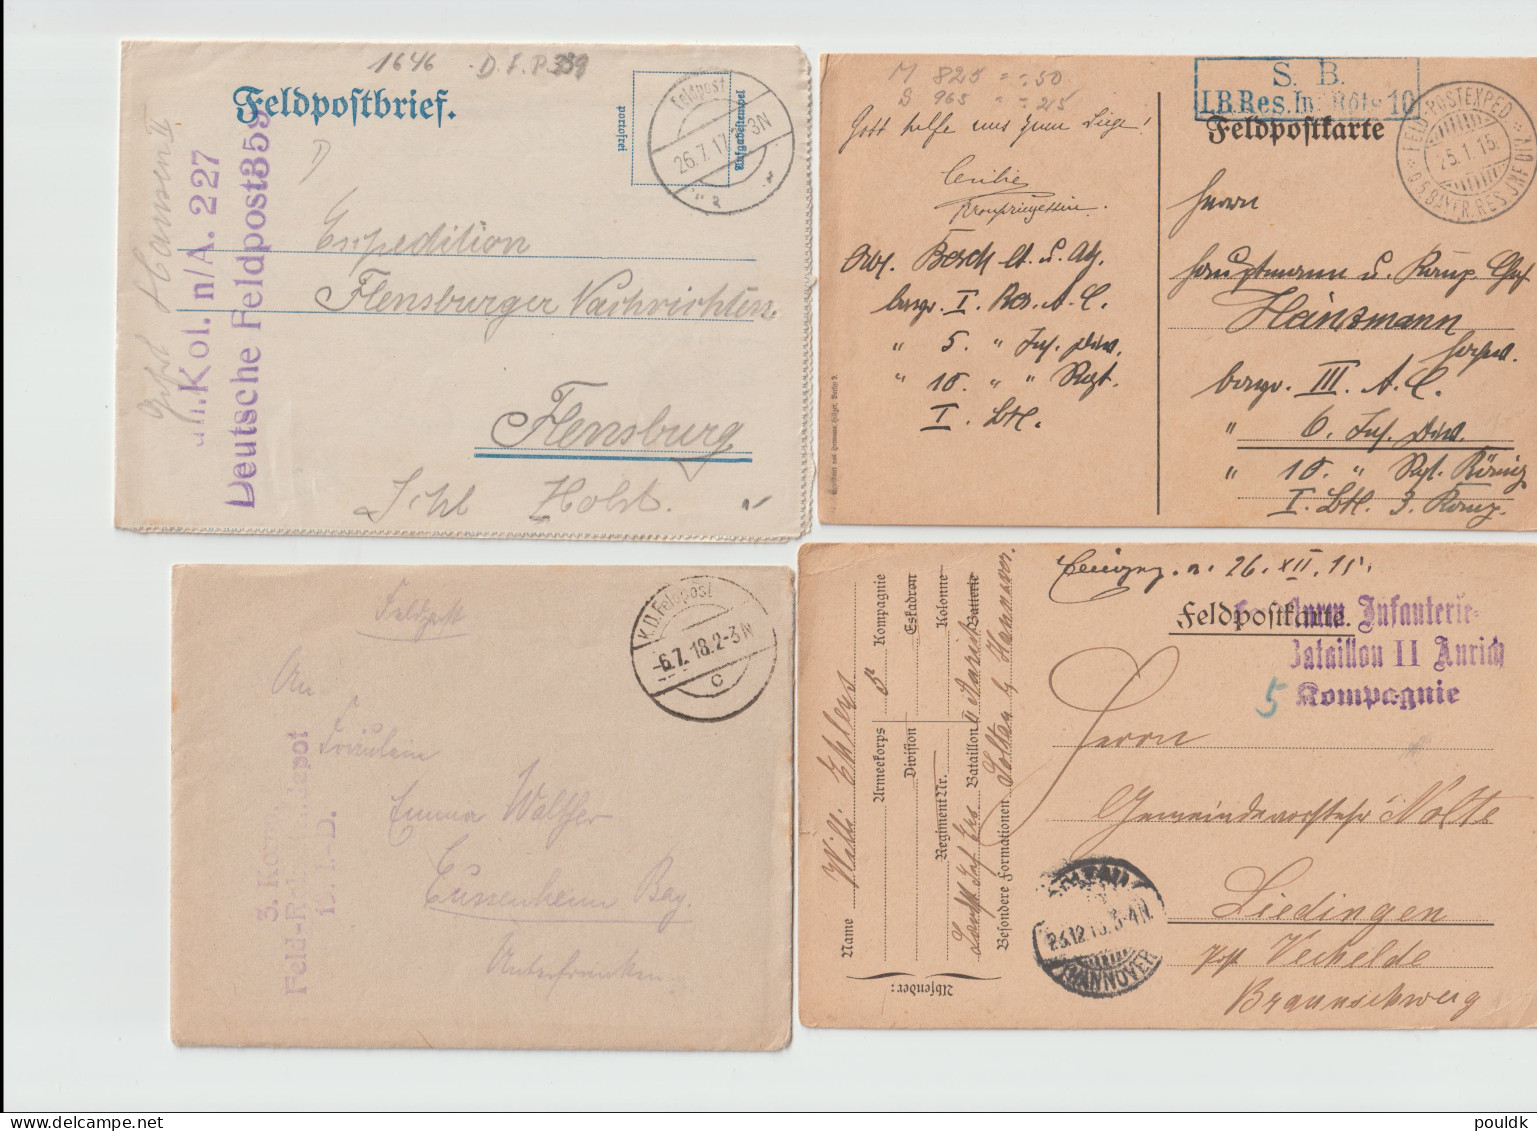 10 Feldpost Covers/cards From World War 1. Postal Weight Approx 99 Gramms. Please Read Sales Conditions Under - Militaria